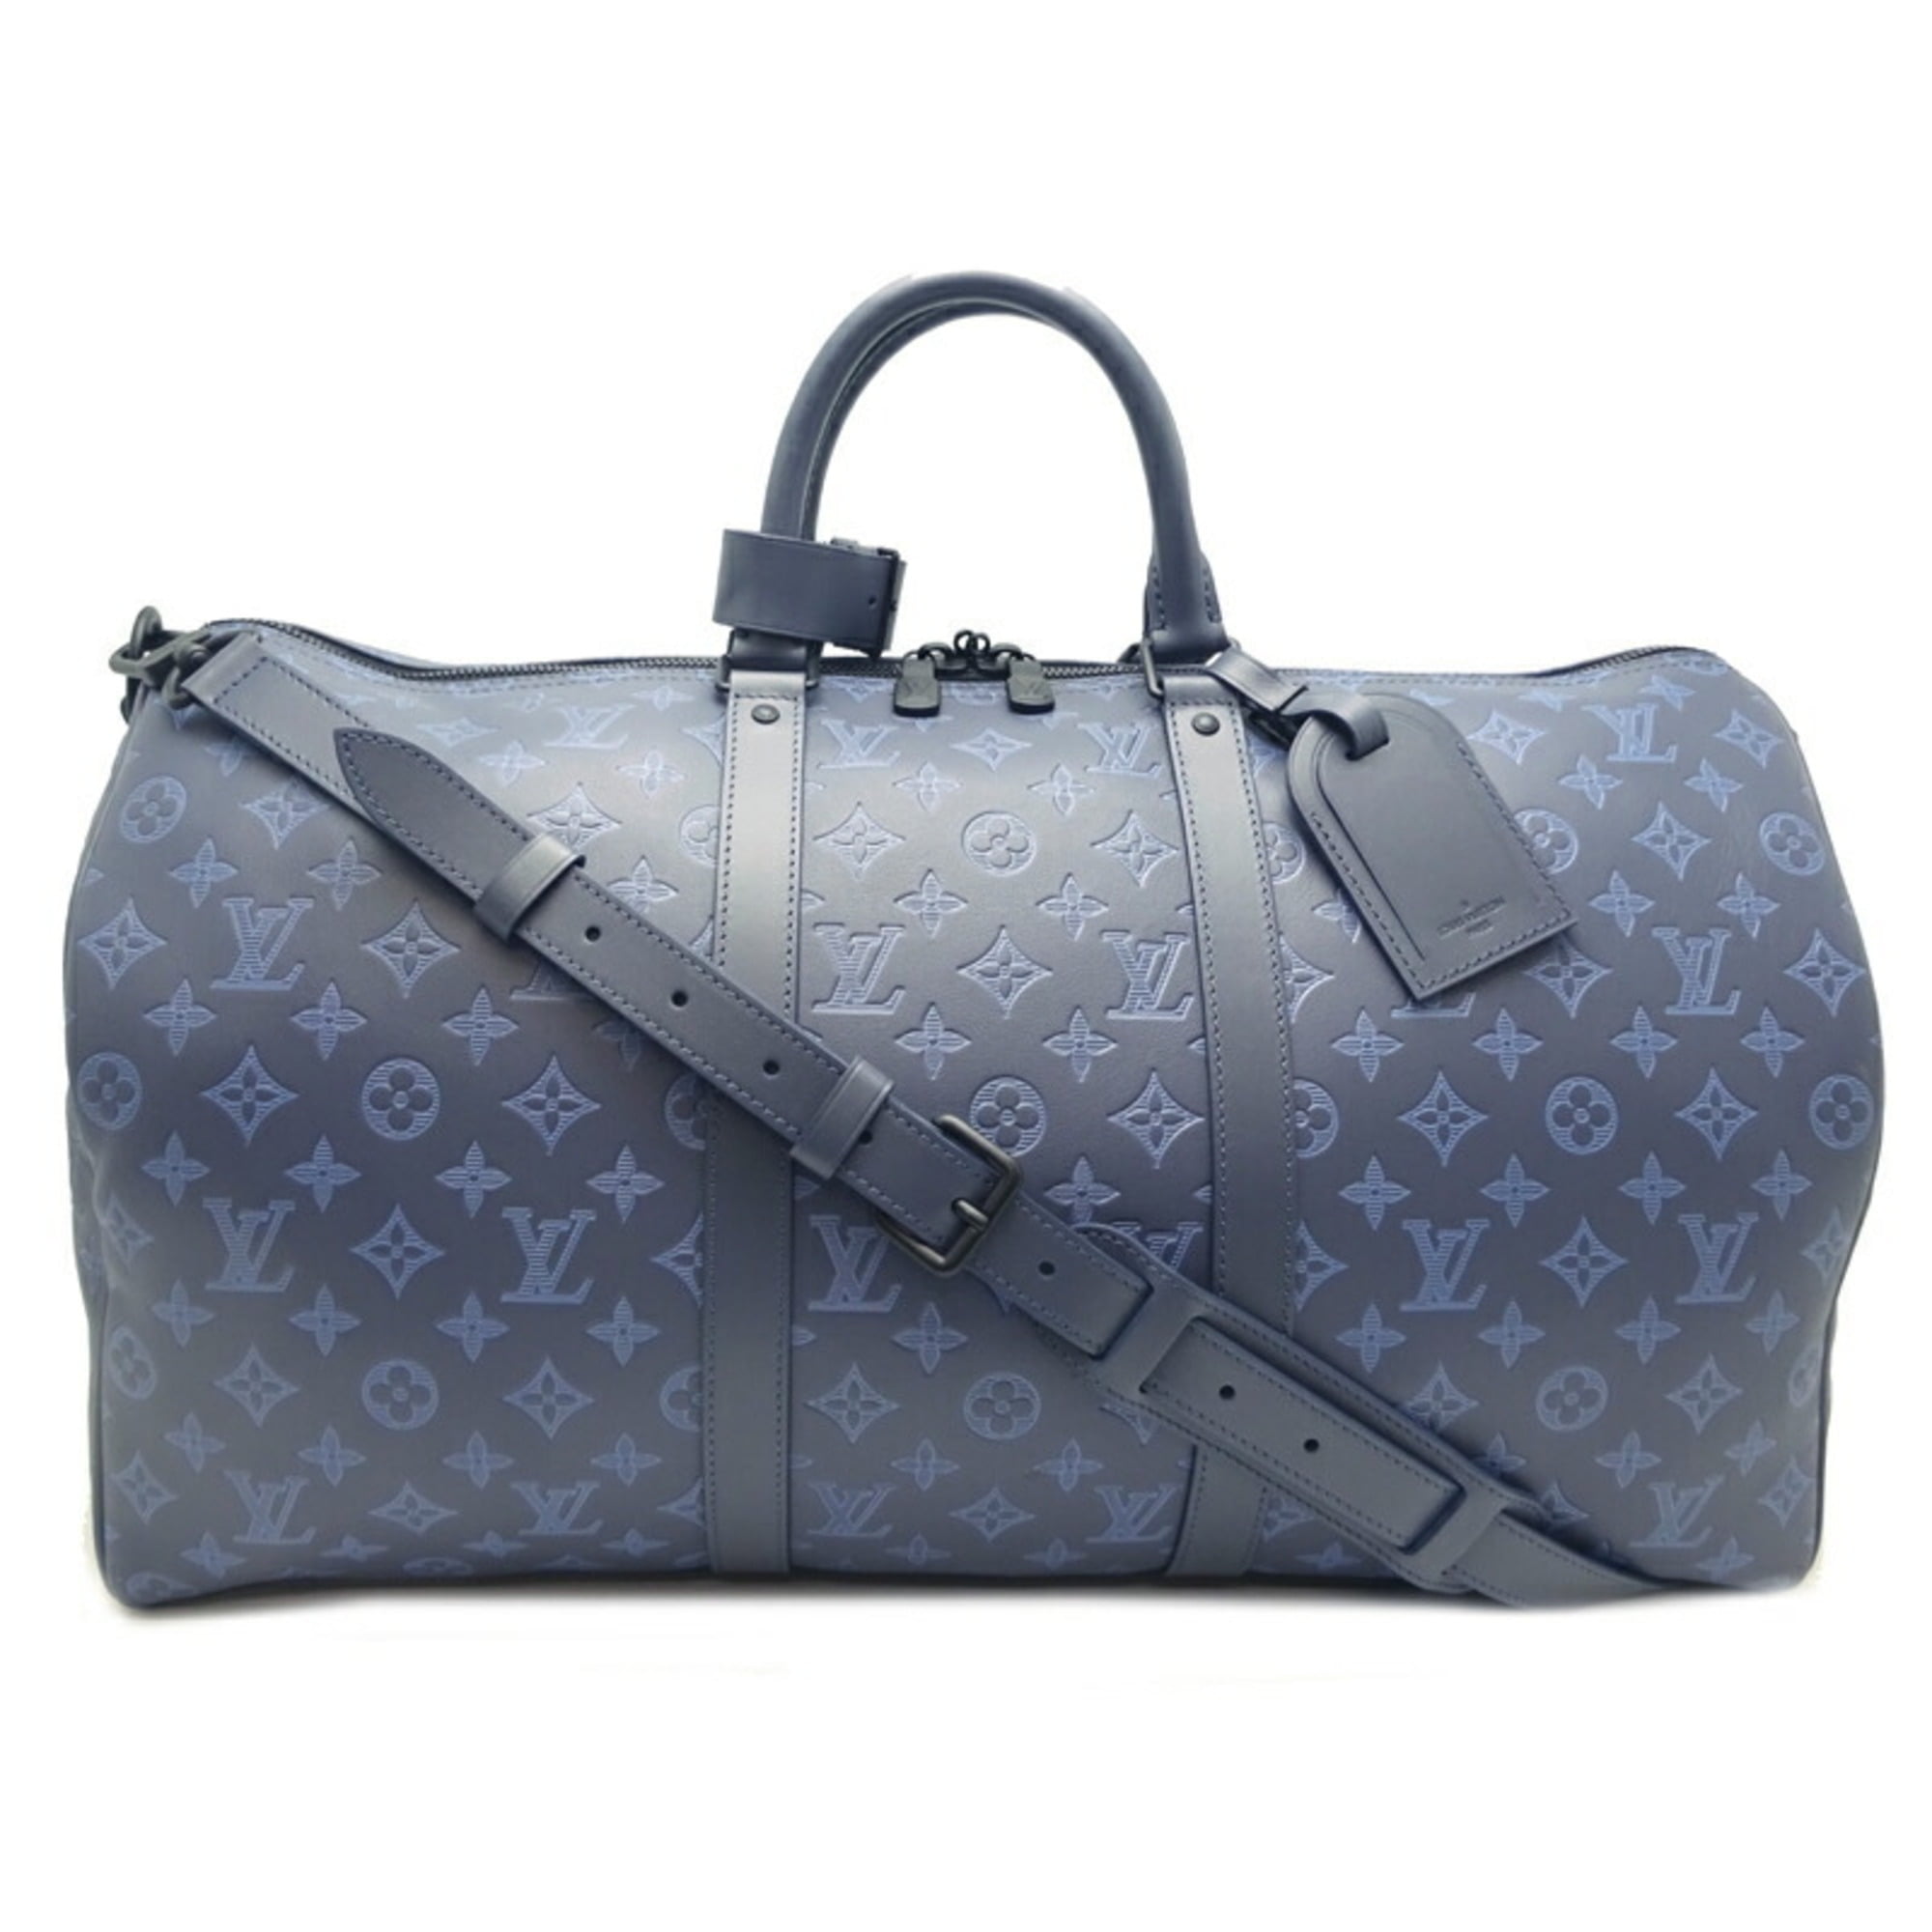 LOUIS VUITTON LOUIS VUITTON Van Gogh Keepall Bandouliere 50 Boston bag  M43347 leather M43347｜Product Code：2101217381734｜BRAND OFF Online Store